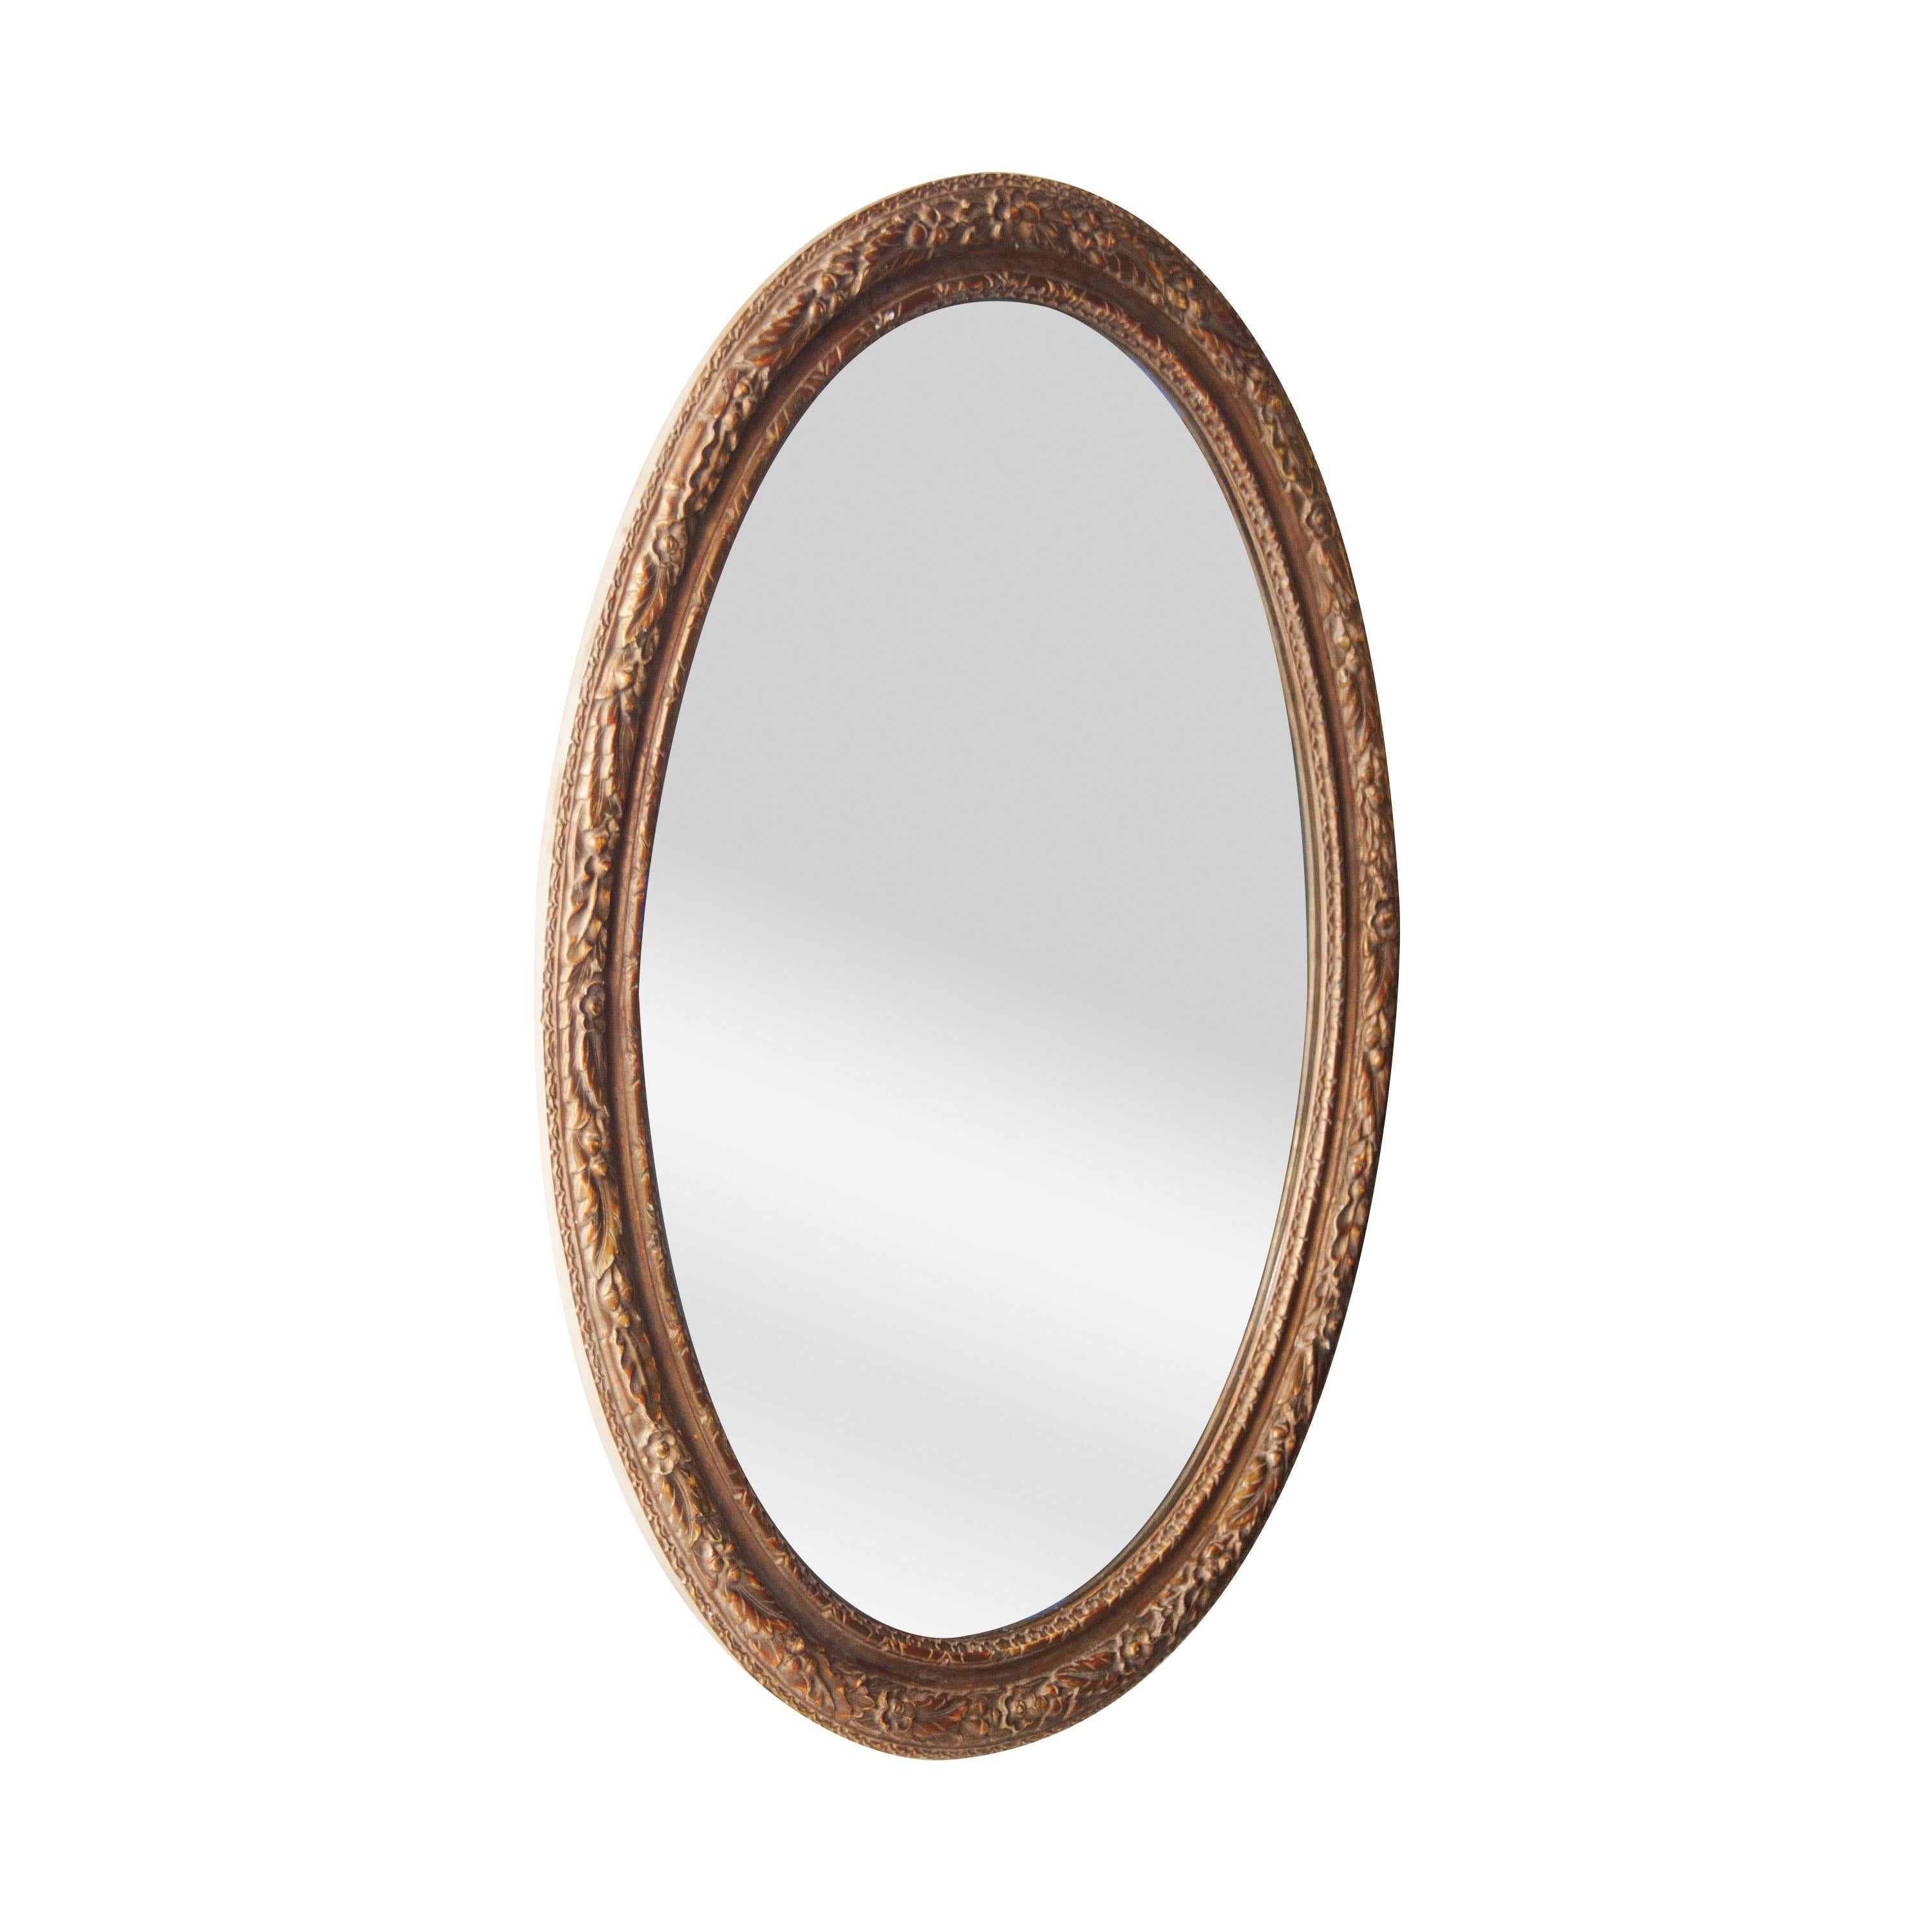 Neoclassical Empire oval handcrafted mirror. Oval hand carved wooden structure with gold foil finished, Spain, 1970.